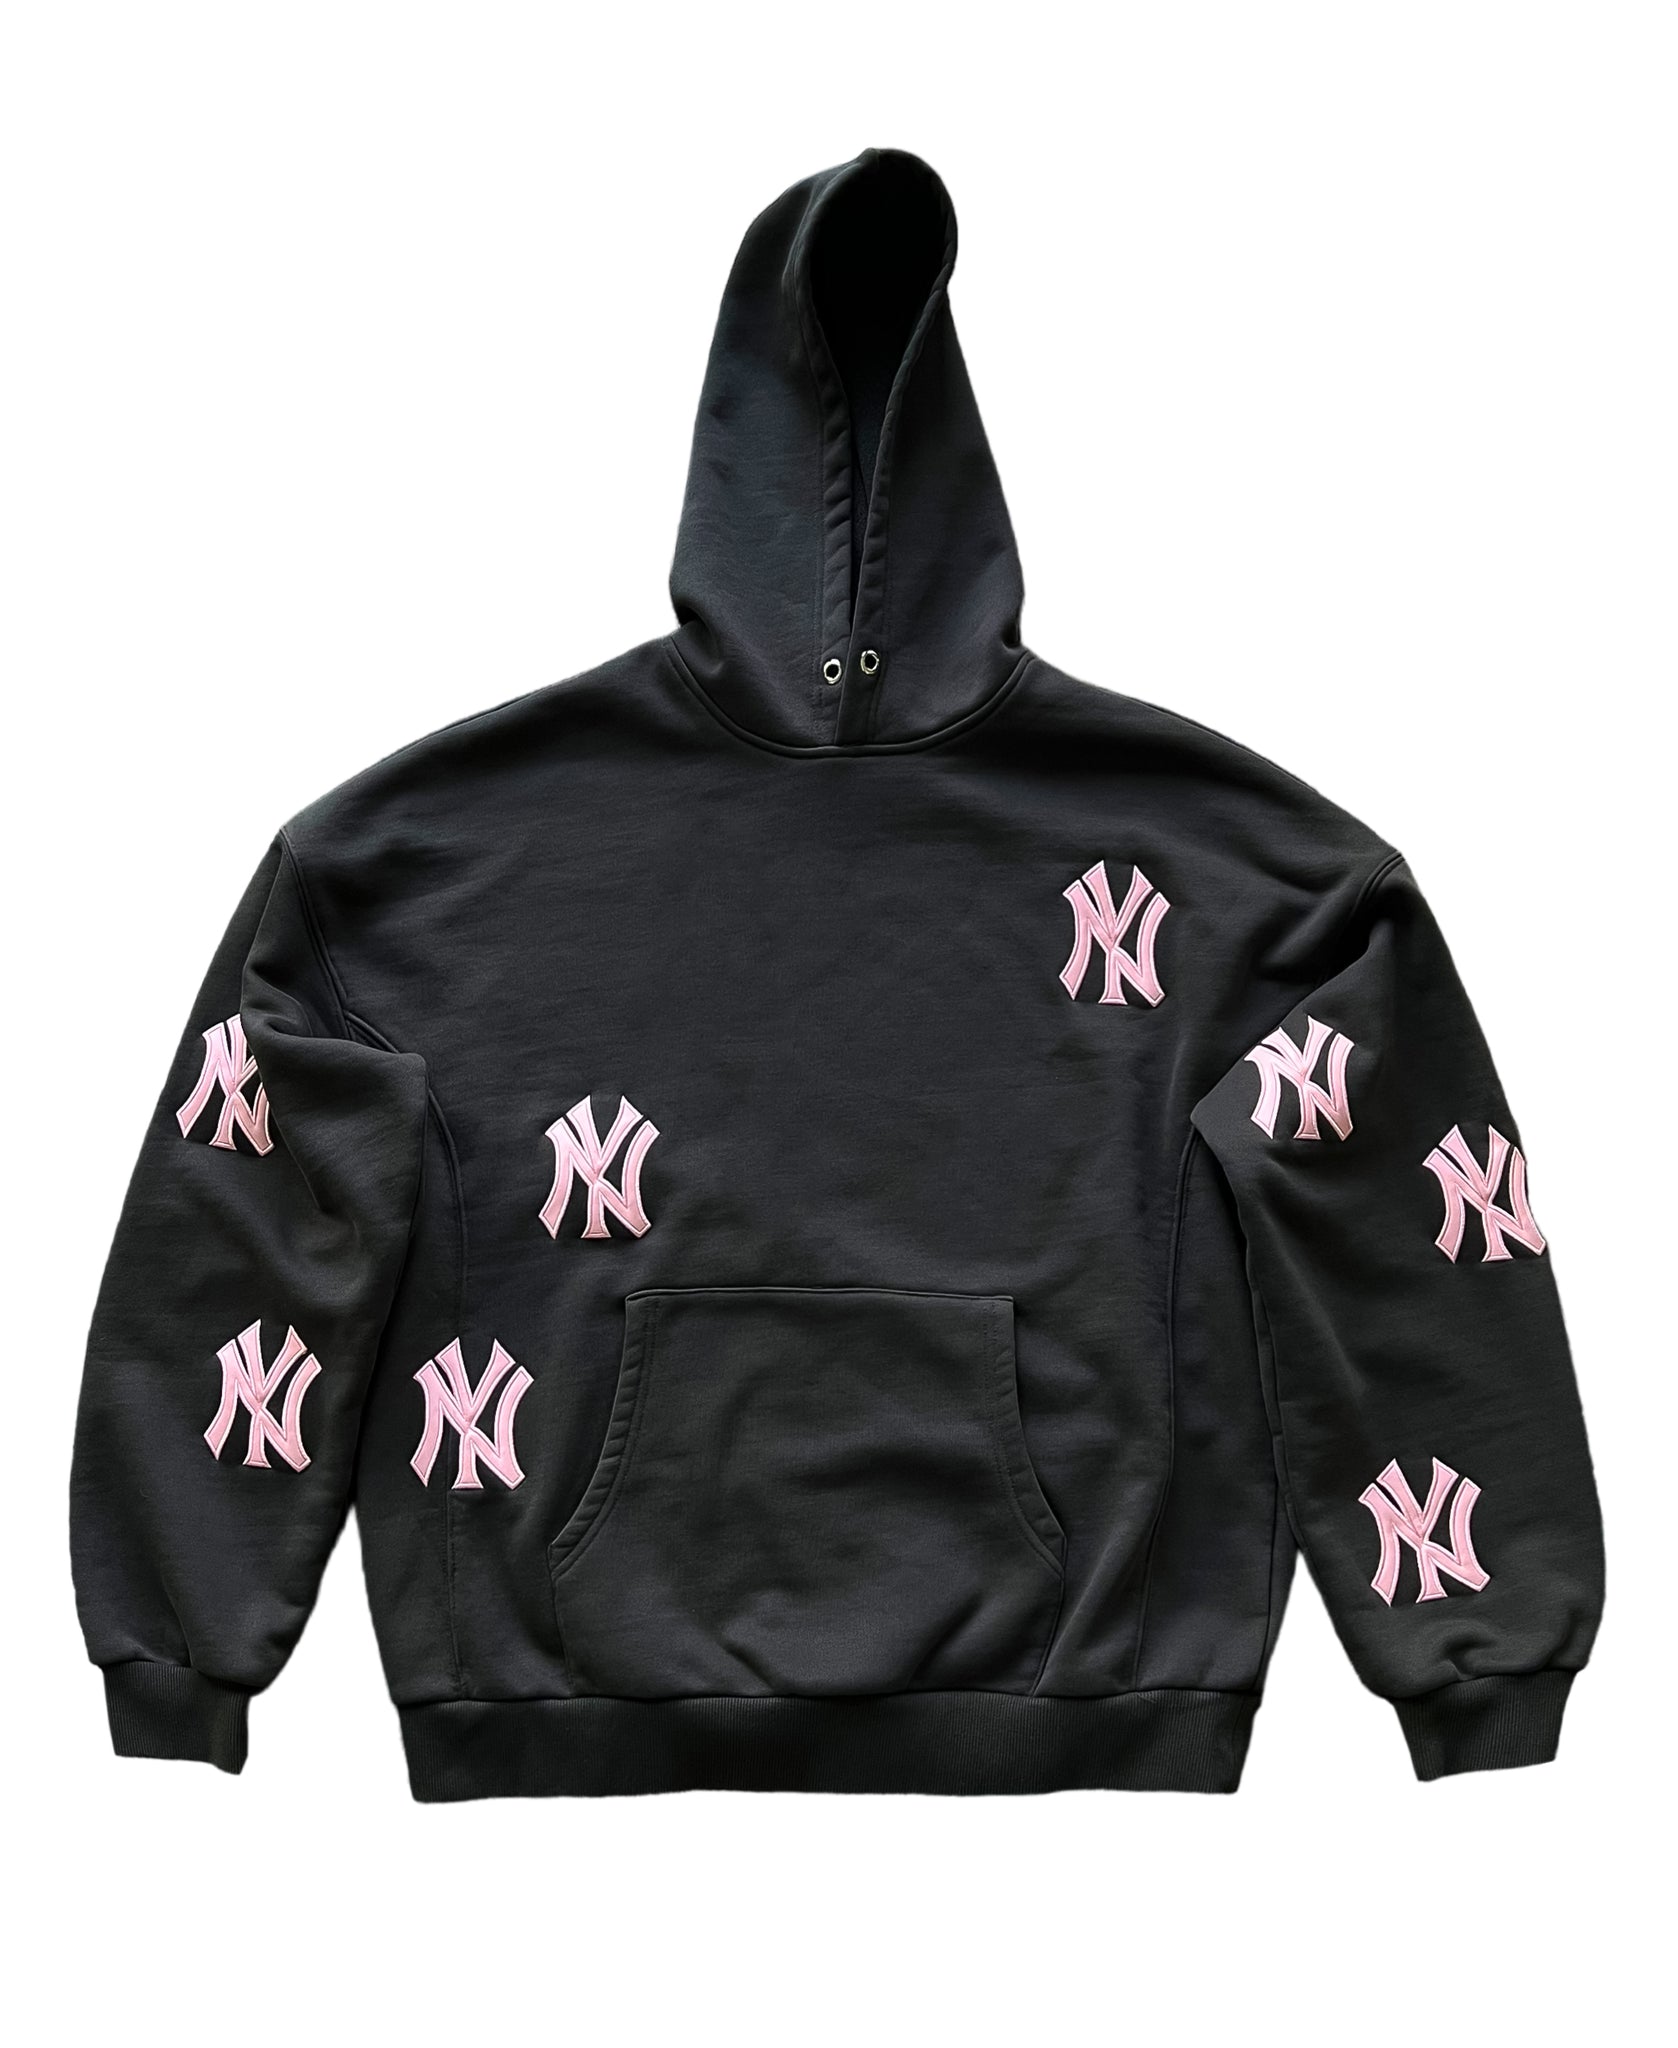 NY Patch Hoodie - Iron